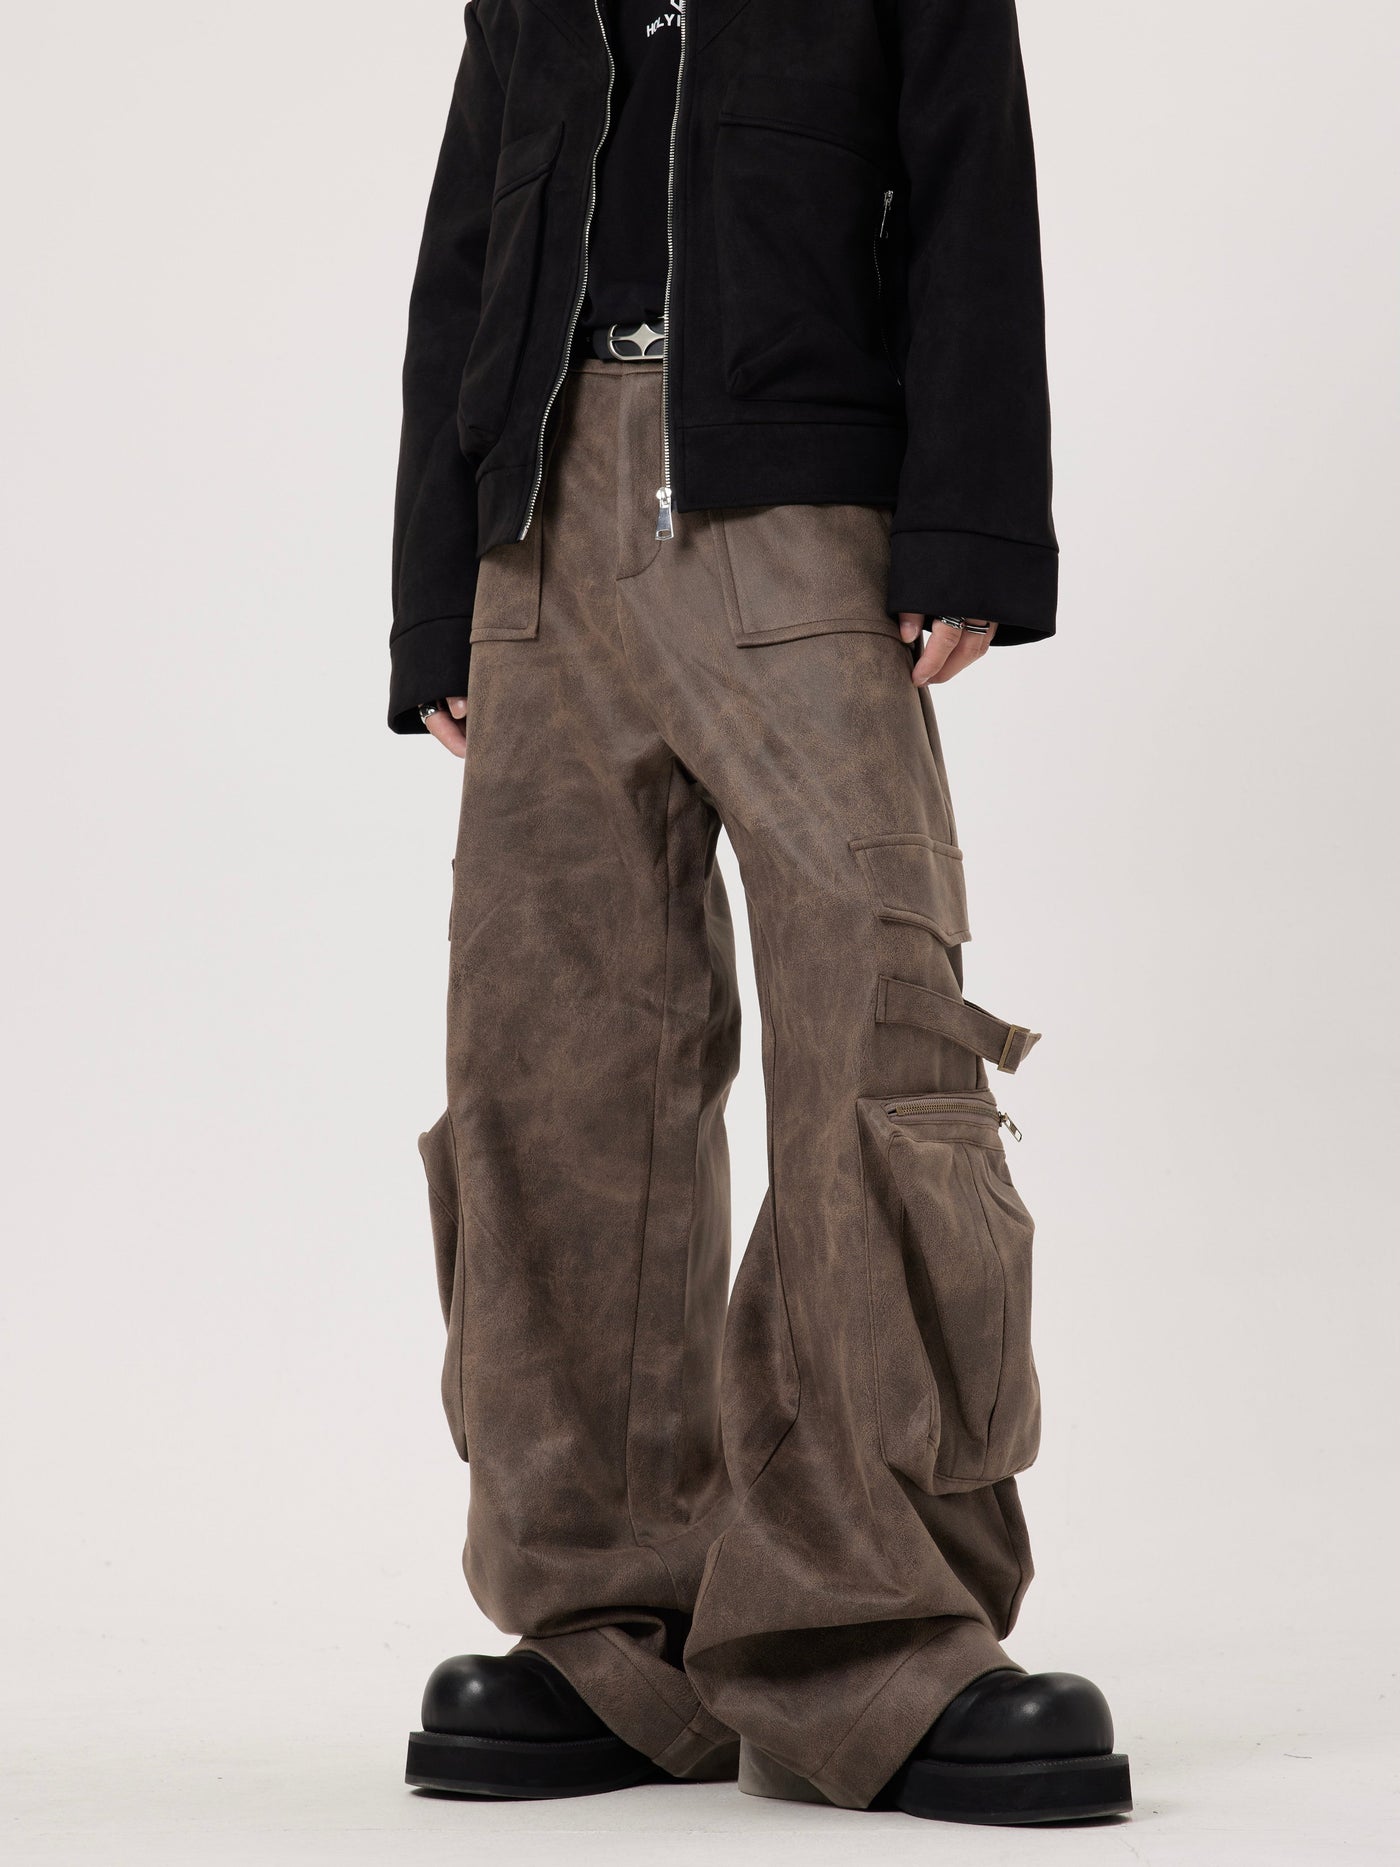 Washed Buckle Strap Cargo Leather Pants Korean Street Fashion Pants By Dark Fog Shop Online at OH Vault